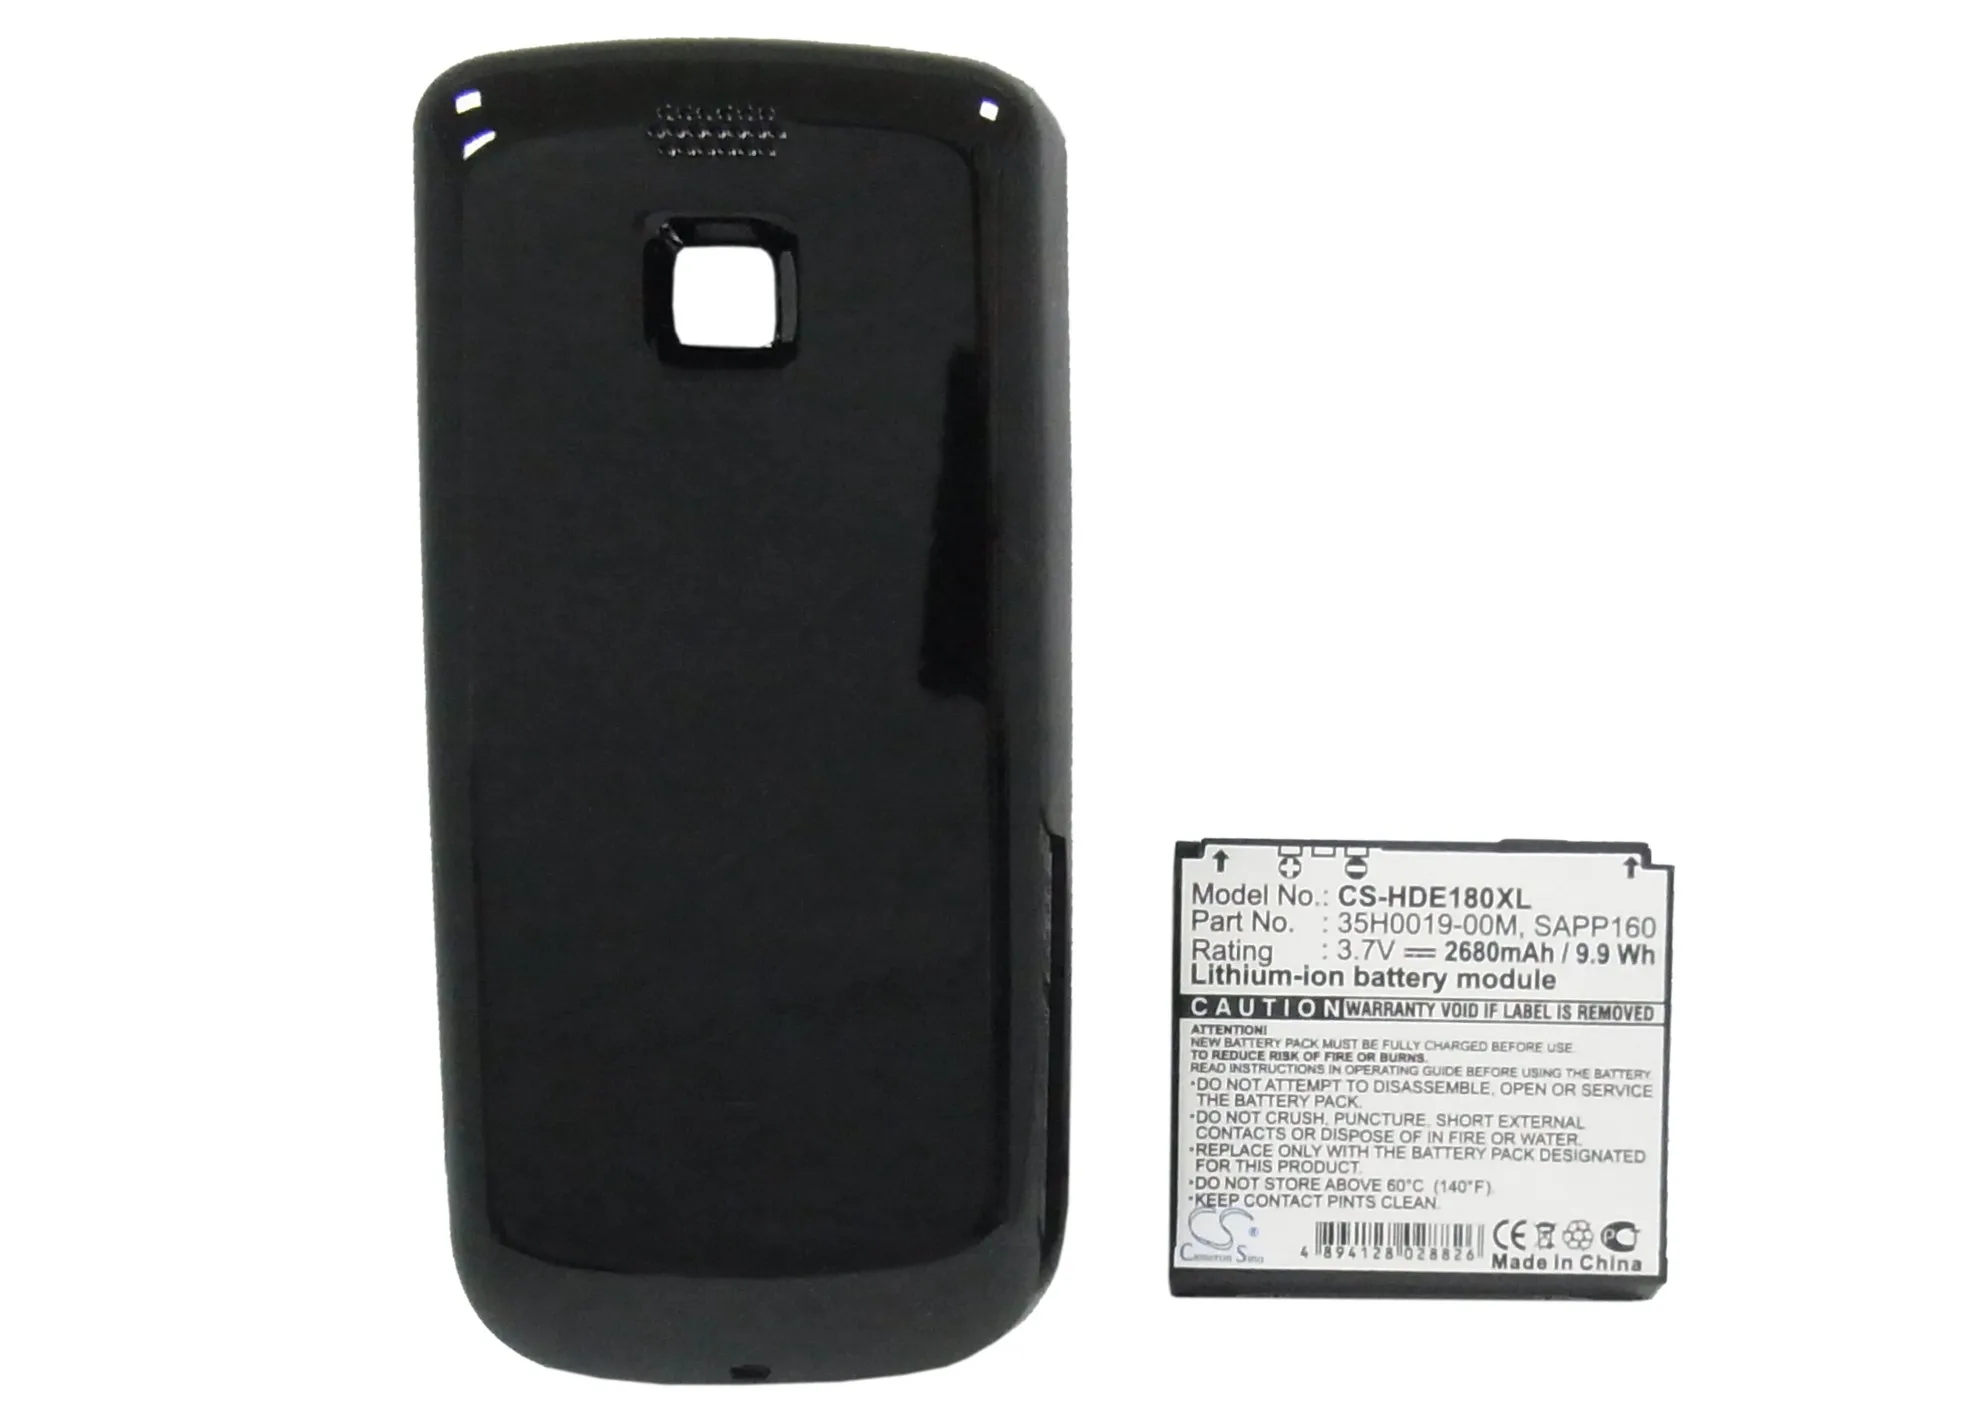 

Cameron Sino 2680mAh Battery SAPP160 for HTC A6161, Magic, Pioneer, Sapphire, Sapphire 100, For T-Mobile G1 Touch, MyTouch 3G